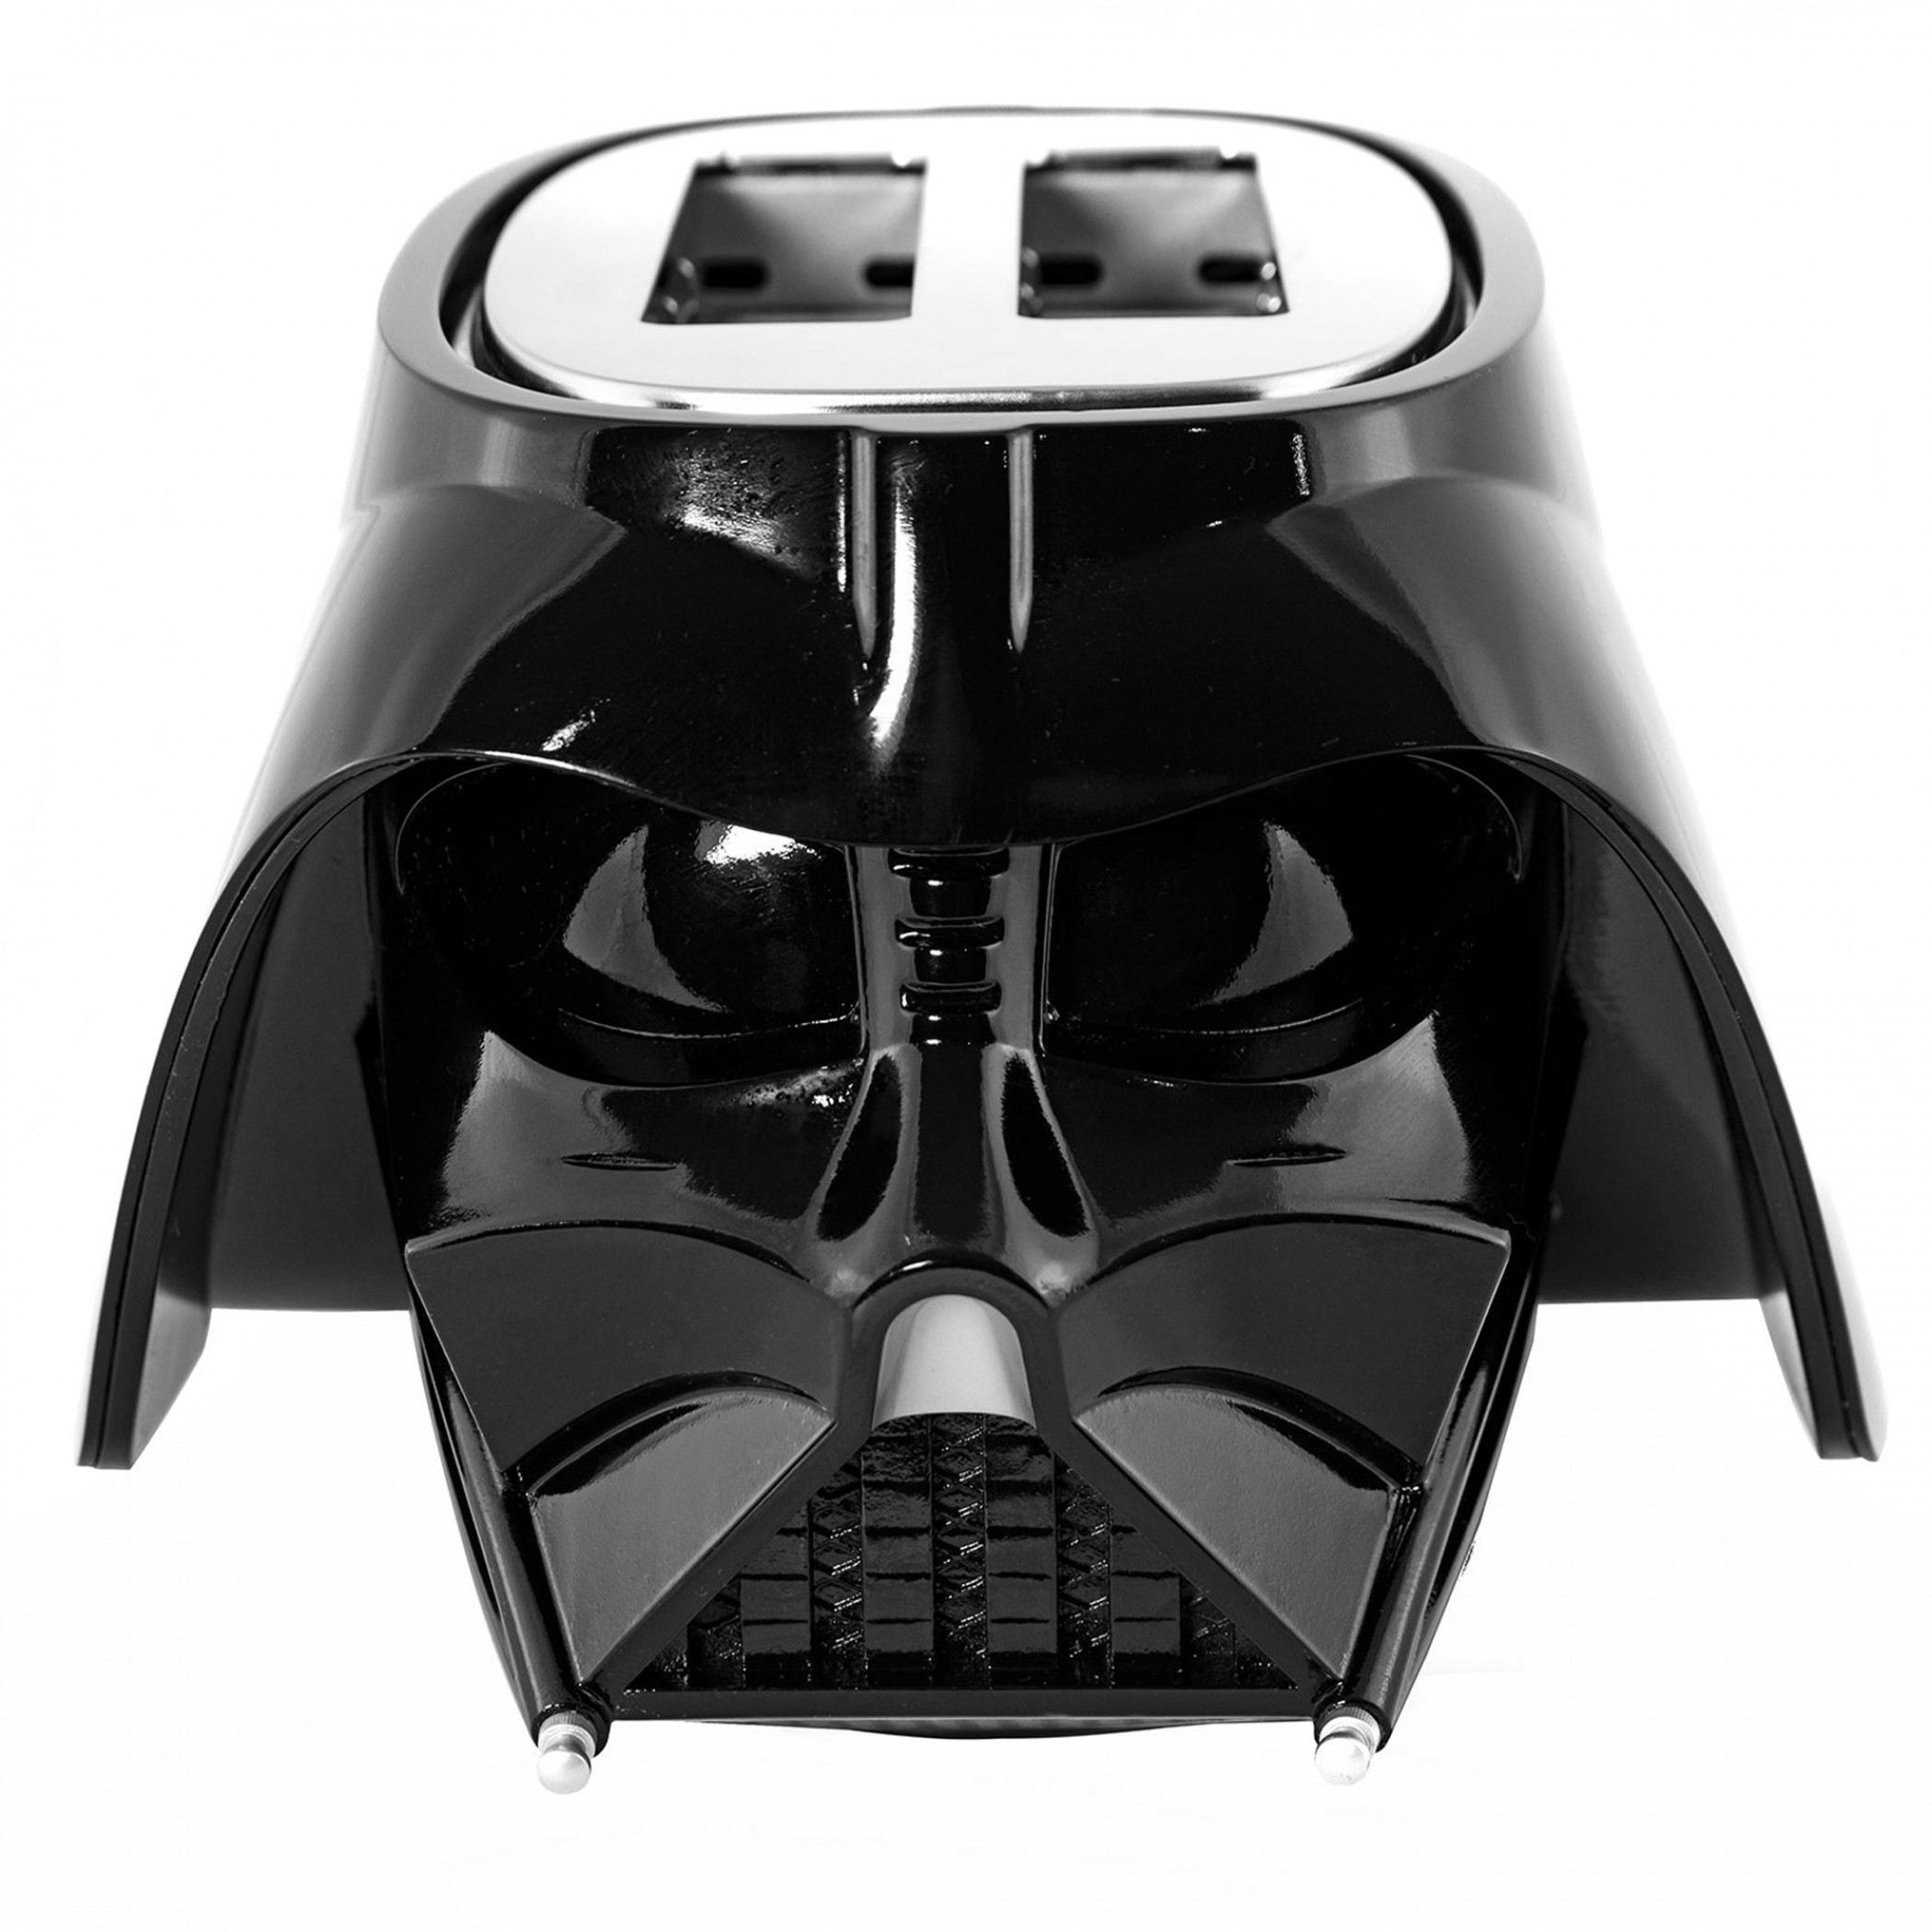 Star Wars Darth Vader Halo Toasters With Lights and Sounds